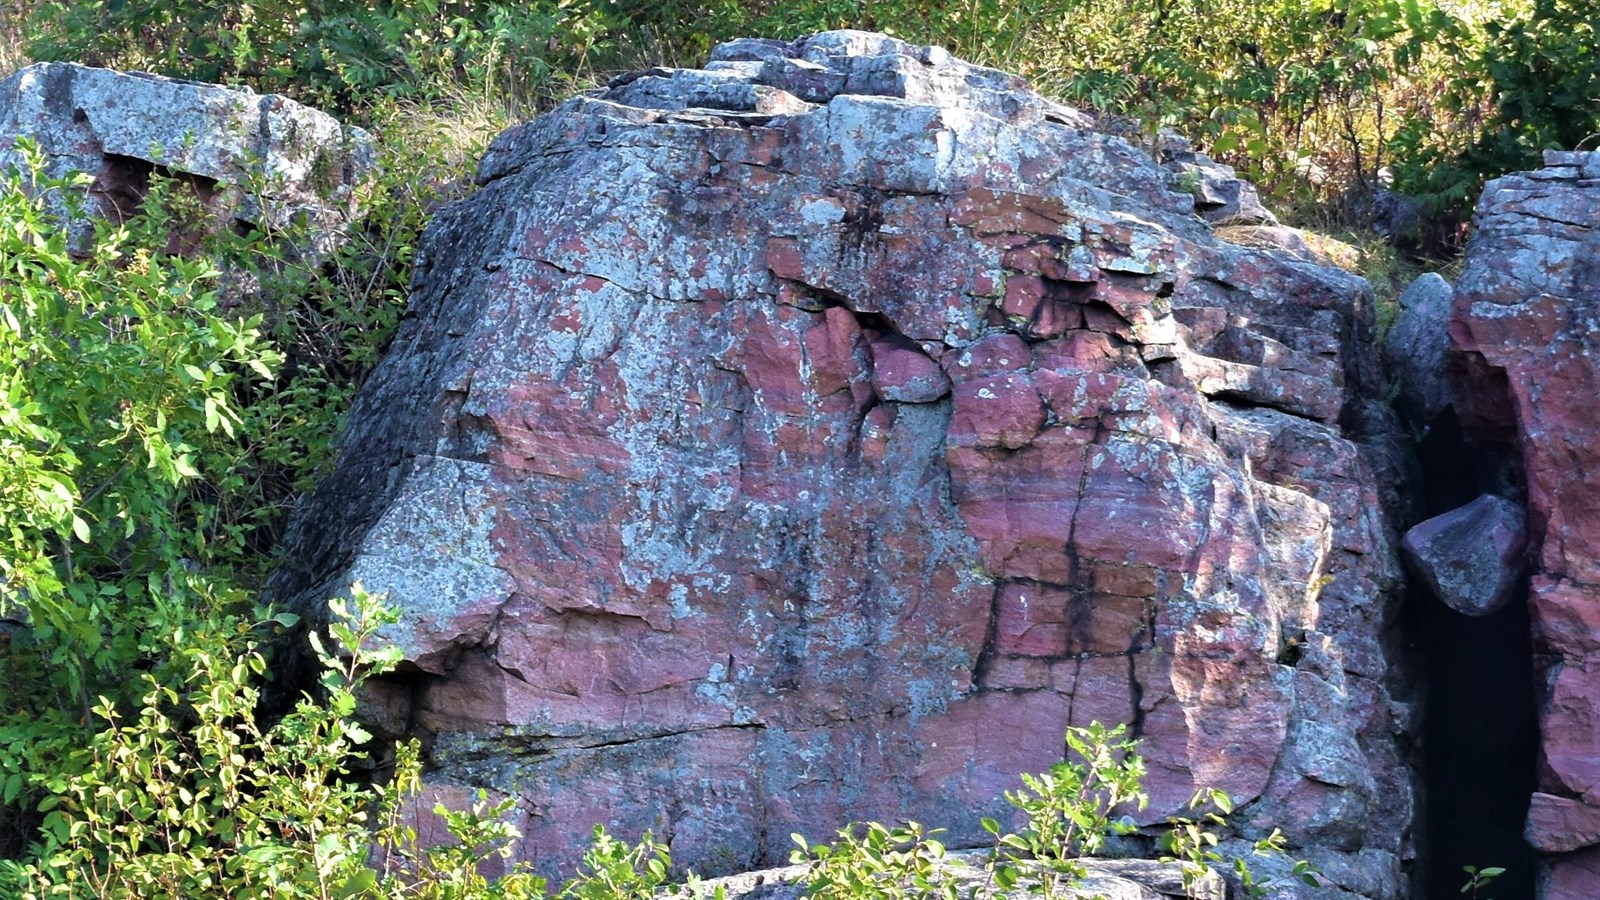 Stone feature resembling a face surrounded by trees.